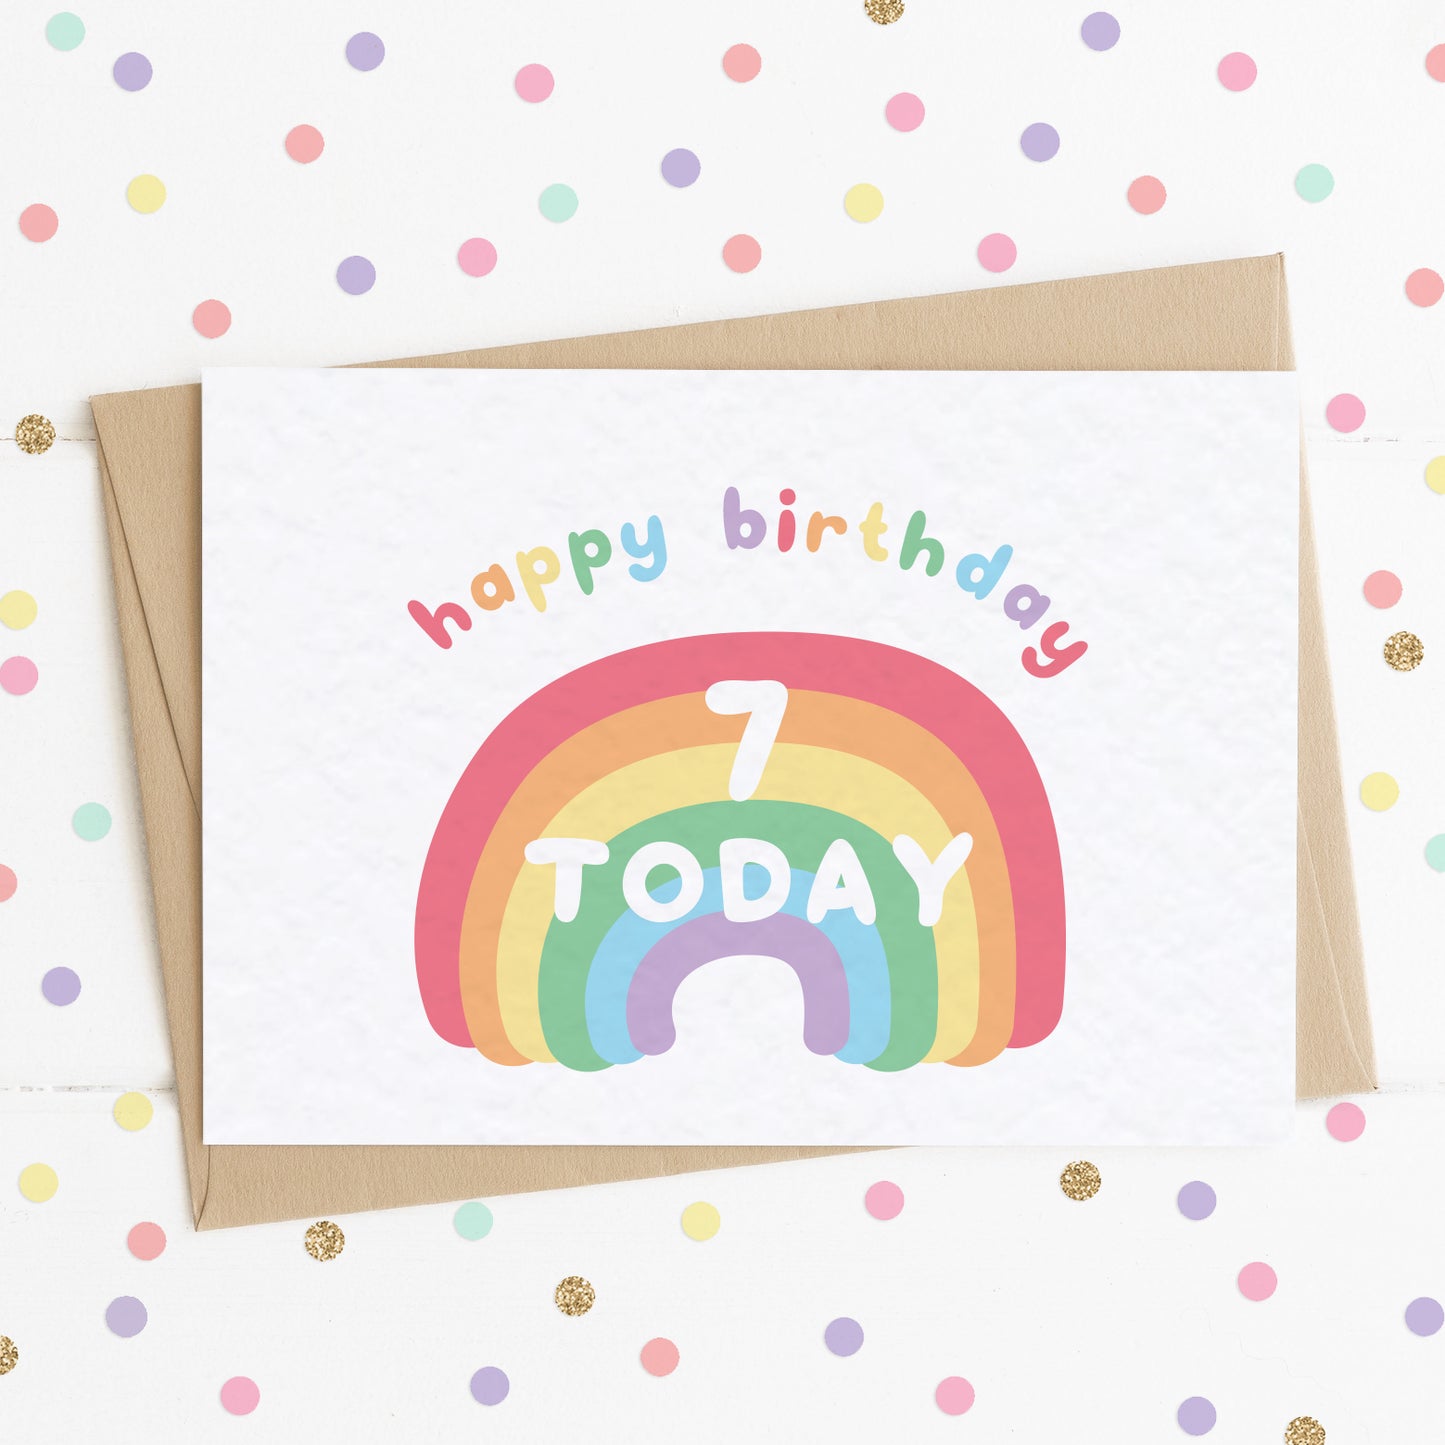 A cute milestone age birthday card with a smiling happy rainbow on it and the message "HAPPY BIRTHDAY - 7 TODAY".